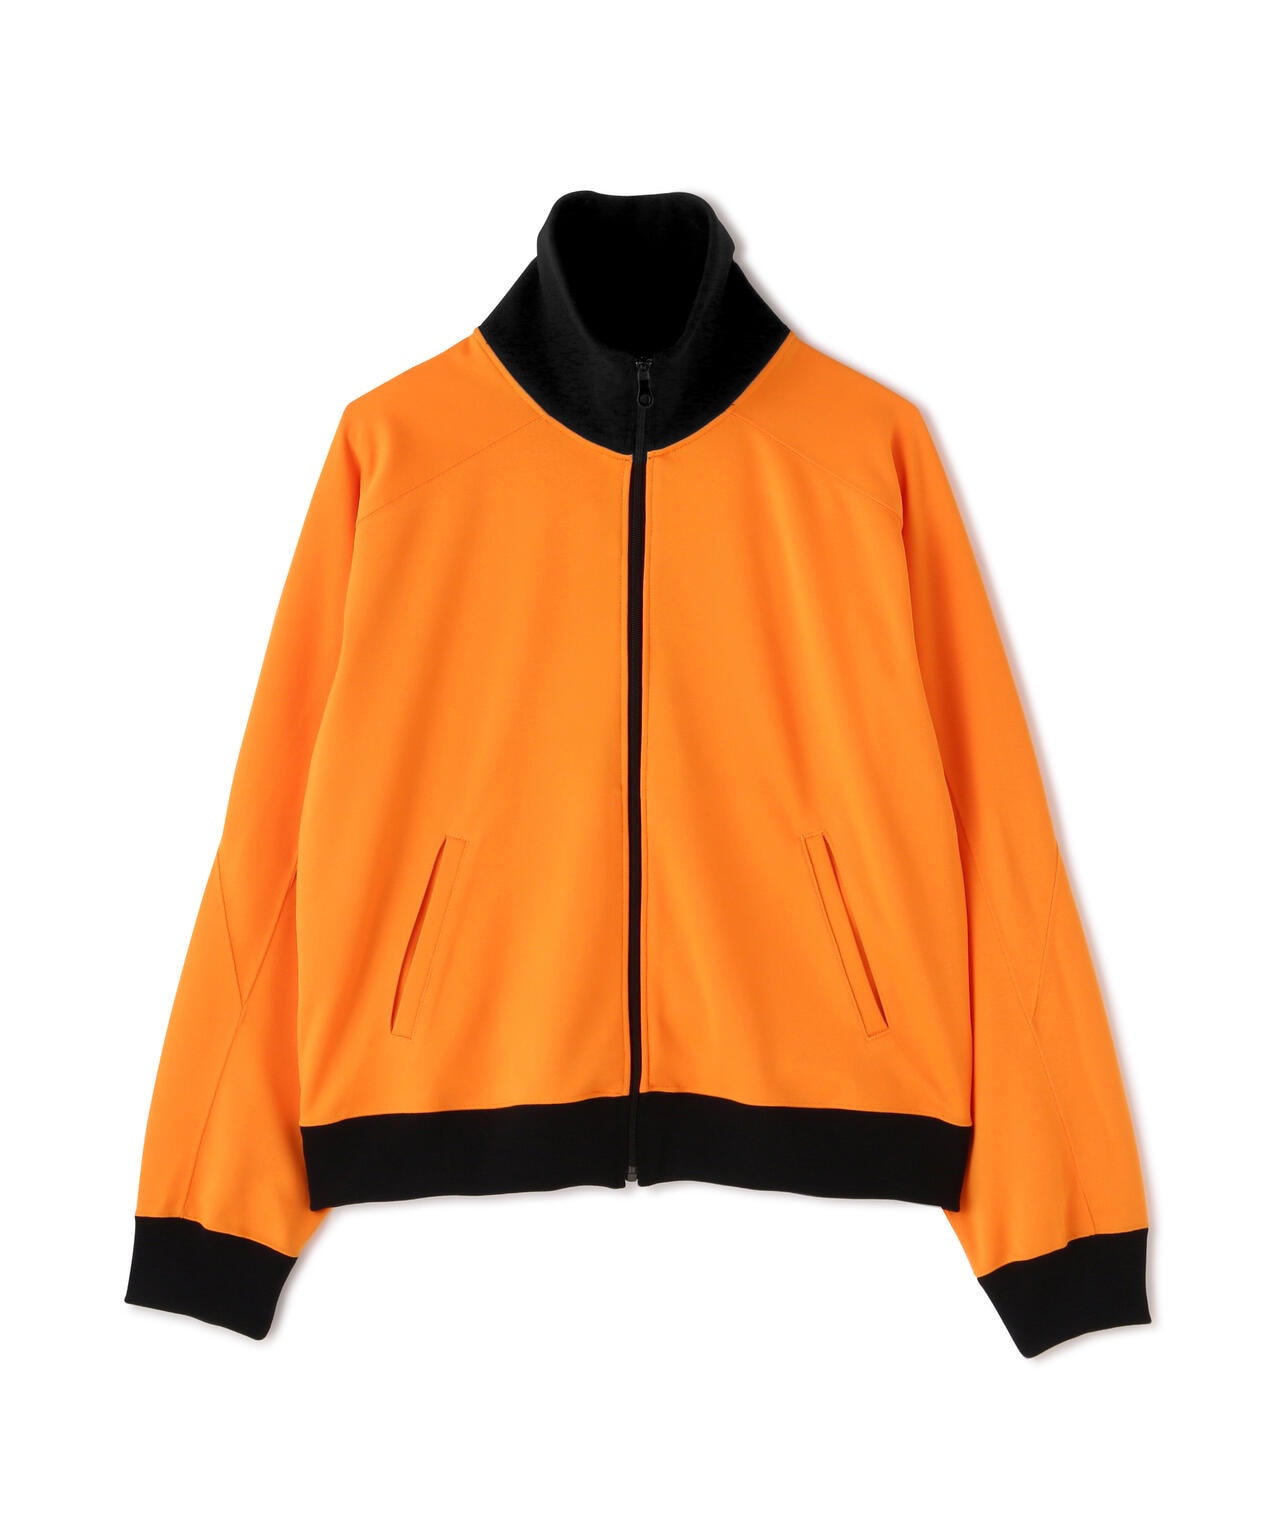 ANCELLM DRIVERS TRACK JACKET オレンジ 2ancellm